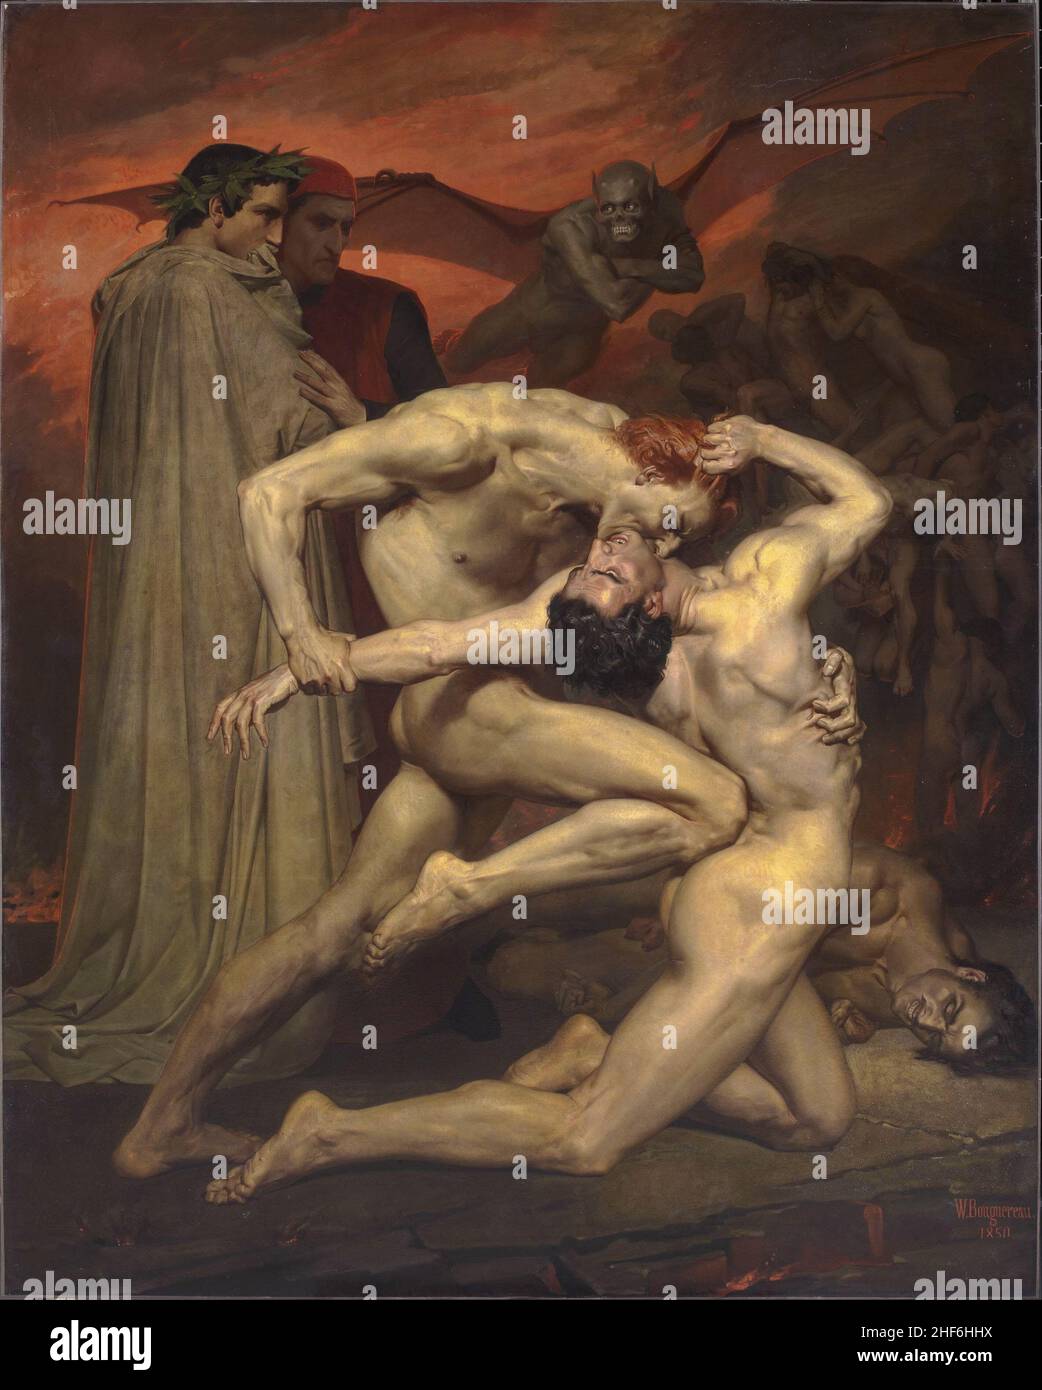 William-Adolphe Bouguereau, Dante and Virgil In Hell, 1850, oil on canvas, Paris, France Stock Photo